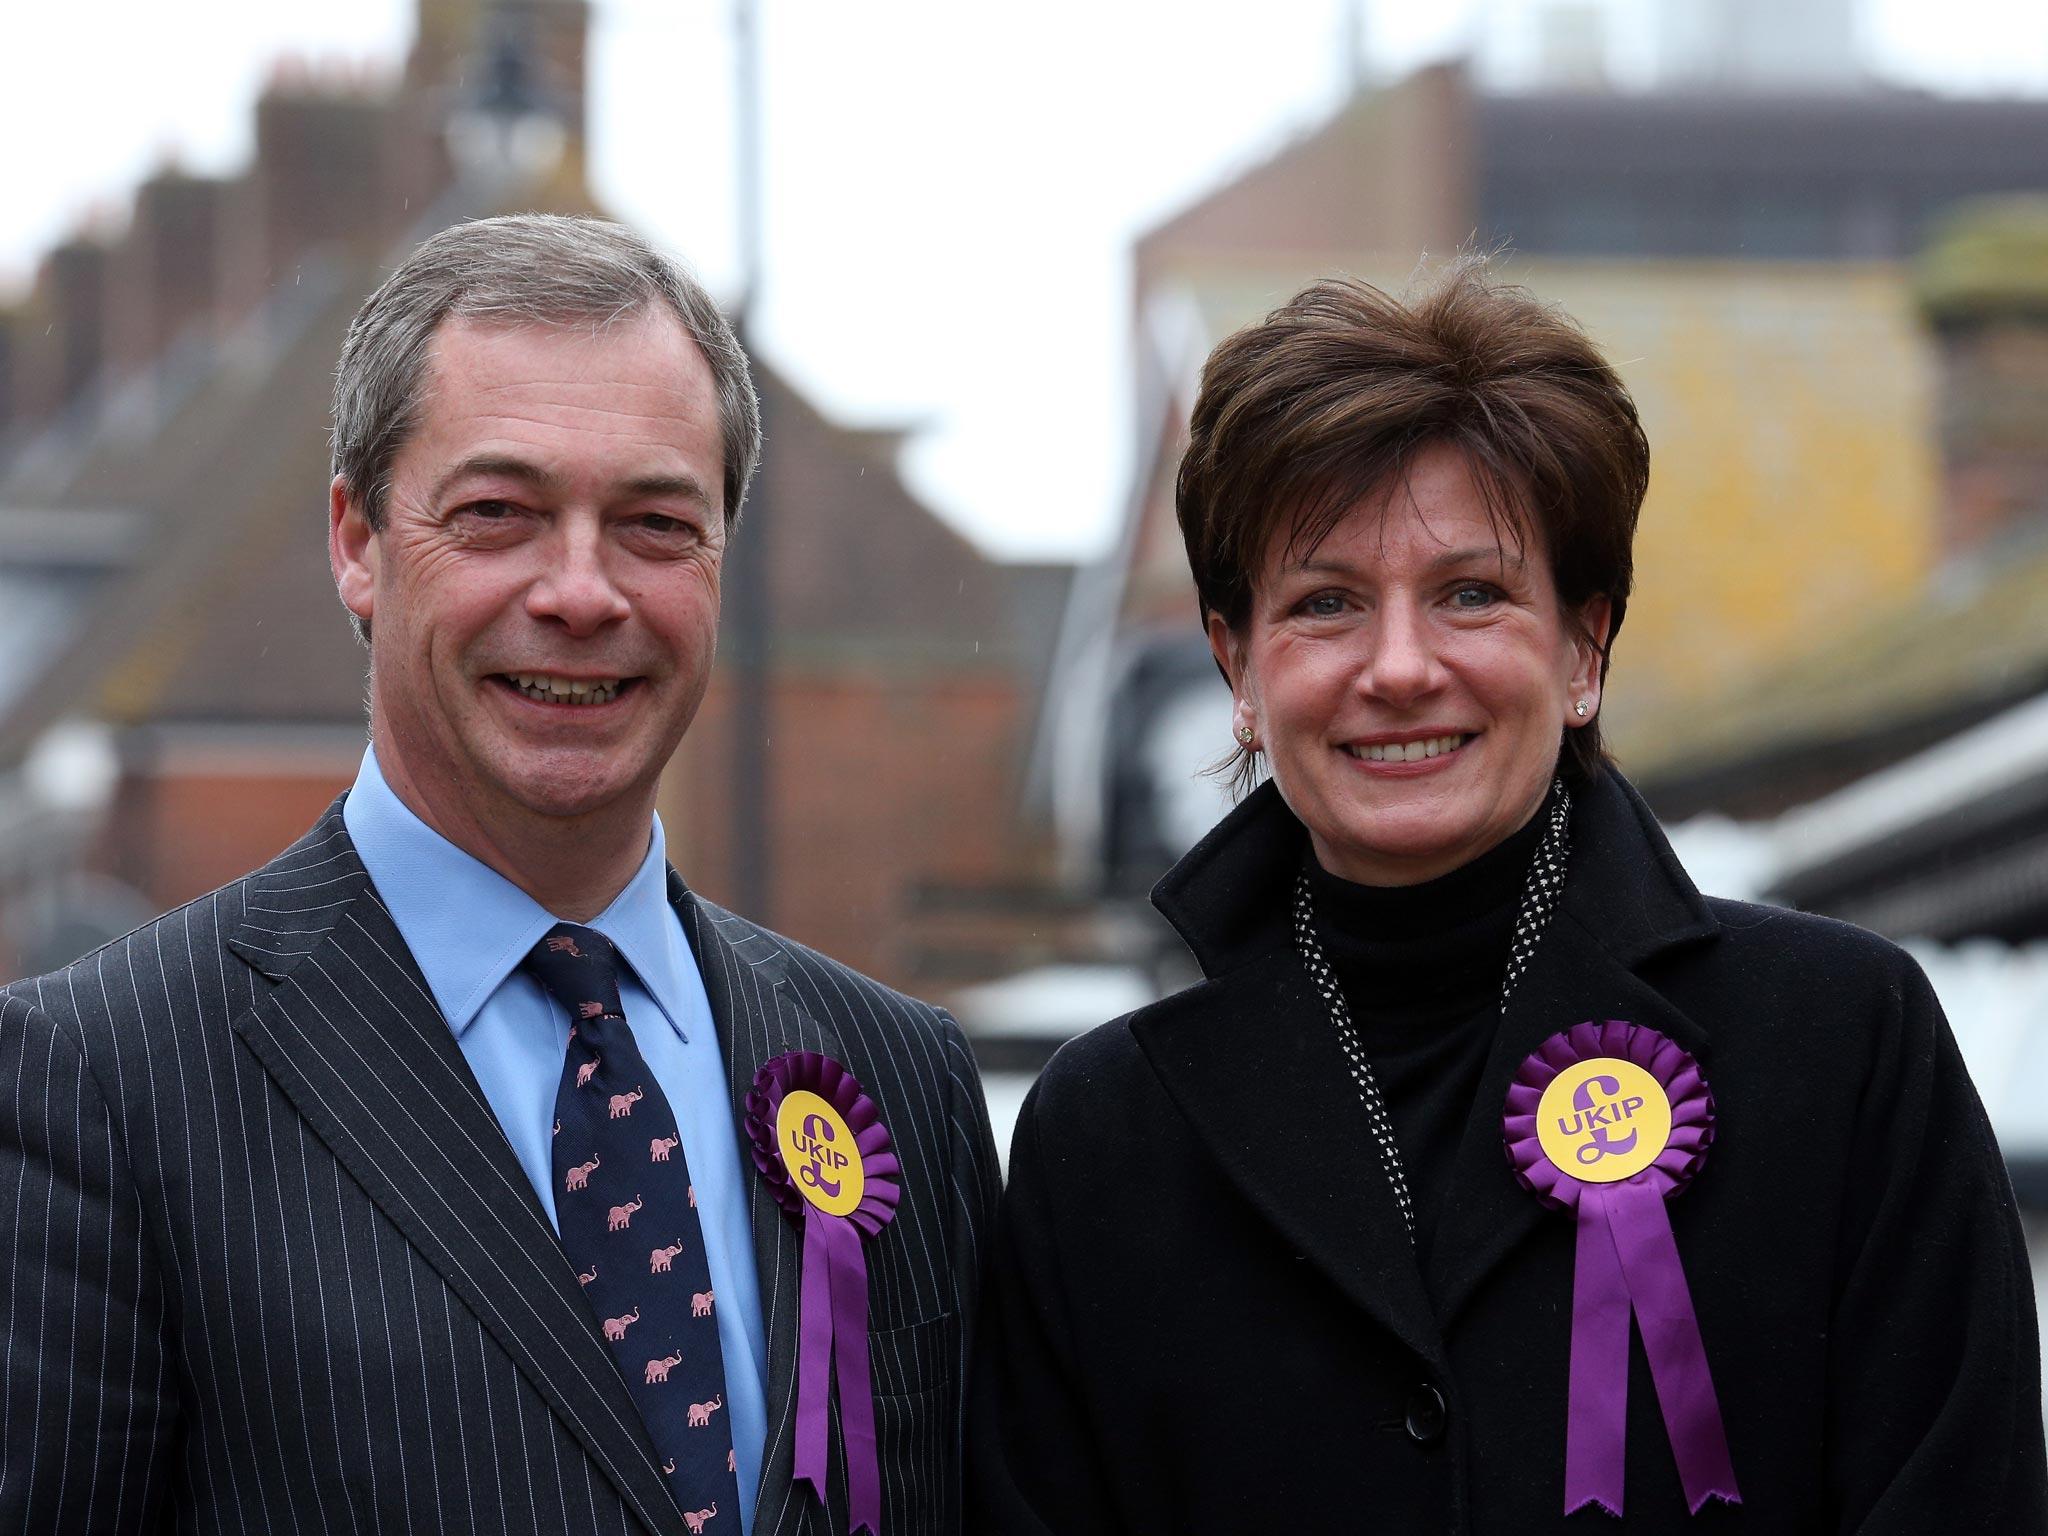 Nigel Farage has promoted Diane James to role of Ukip's home affairs and justice spokeswoman